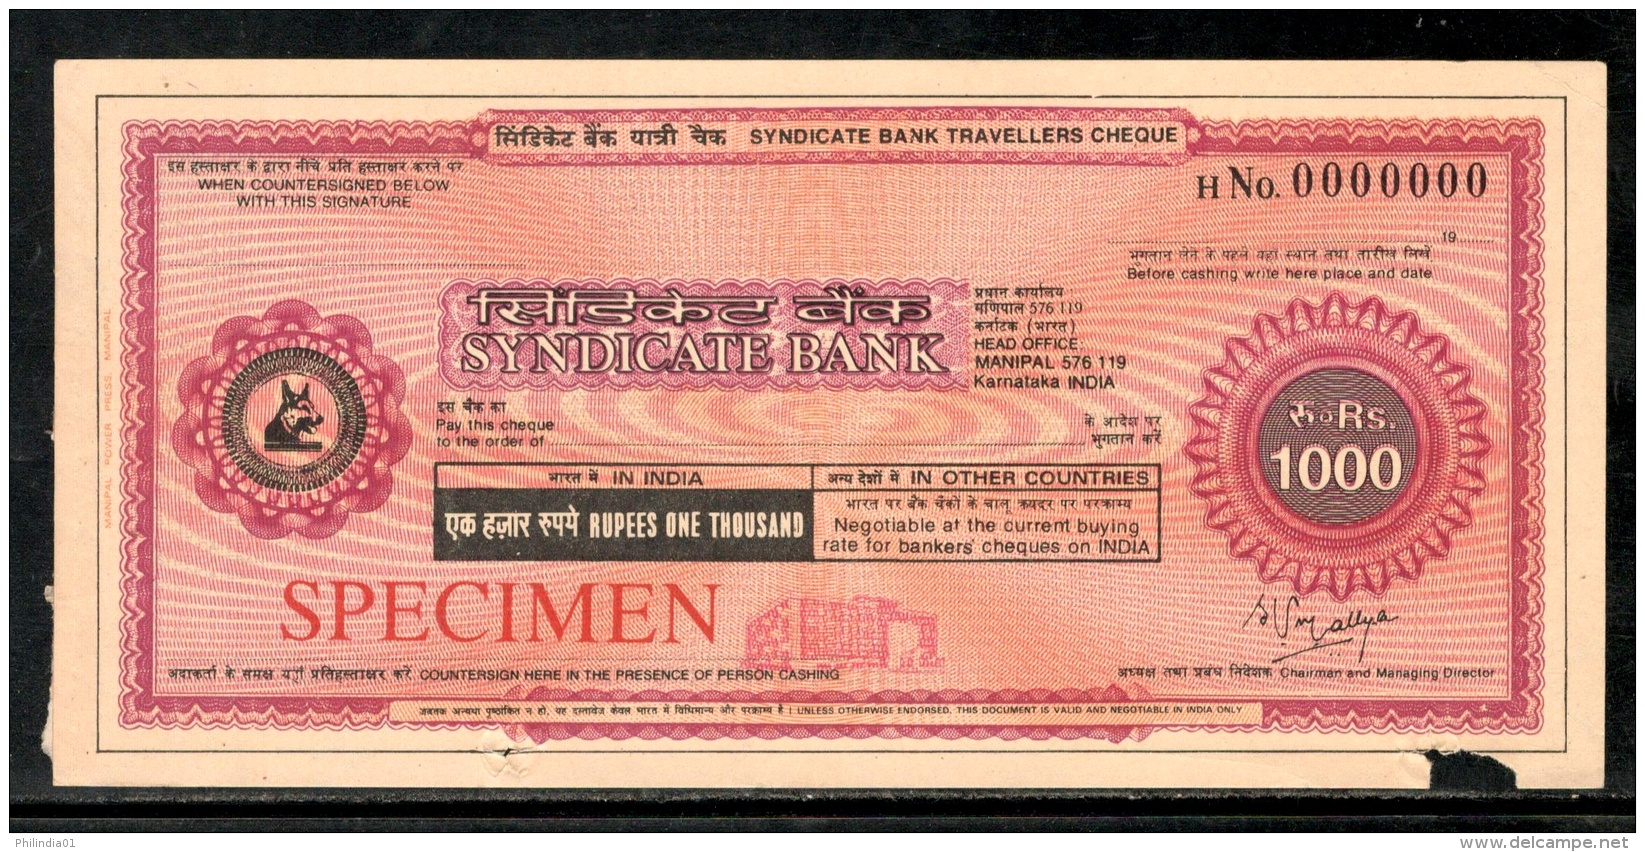 India Rs.1000 Syndicate Bank Traveller's Cheques ' SPECIMEN ' RARE # 16132D - Cheques & Traveler's Cheques